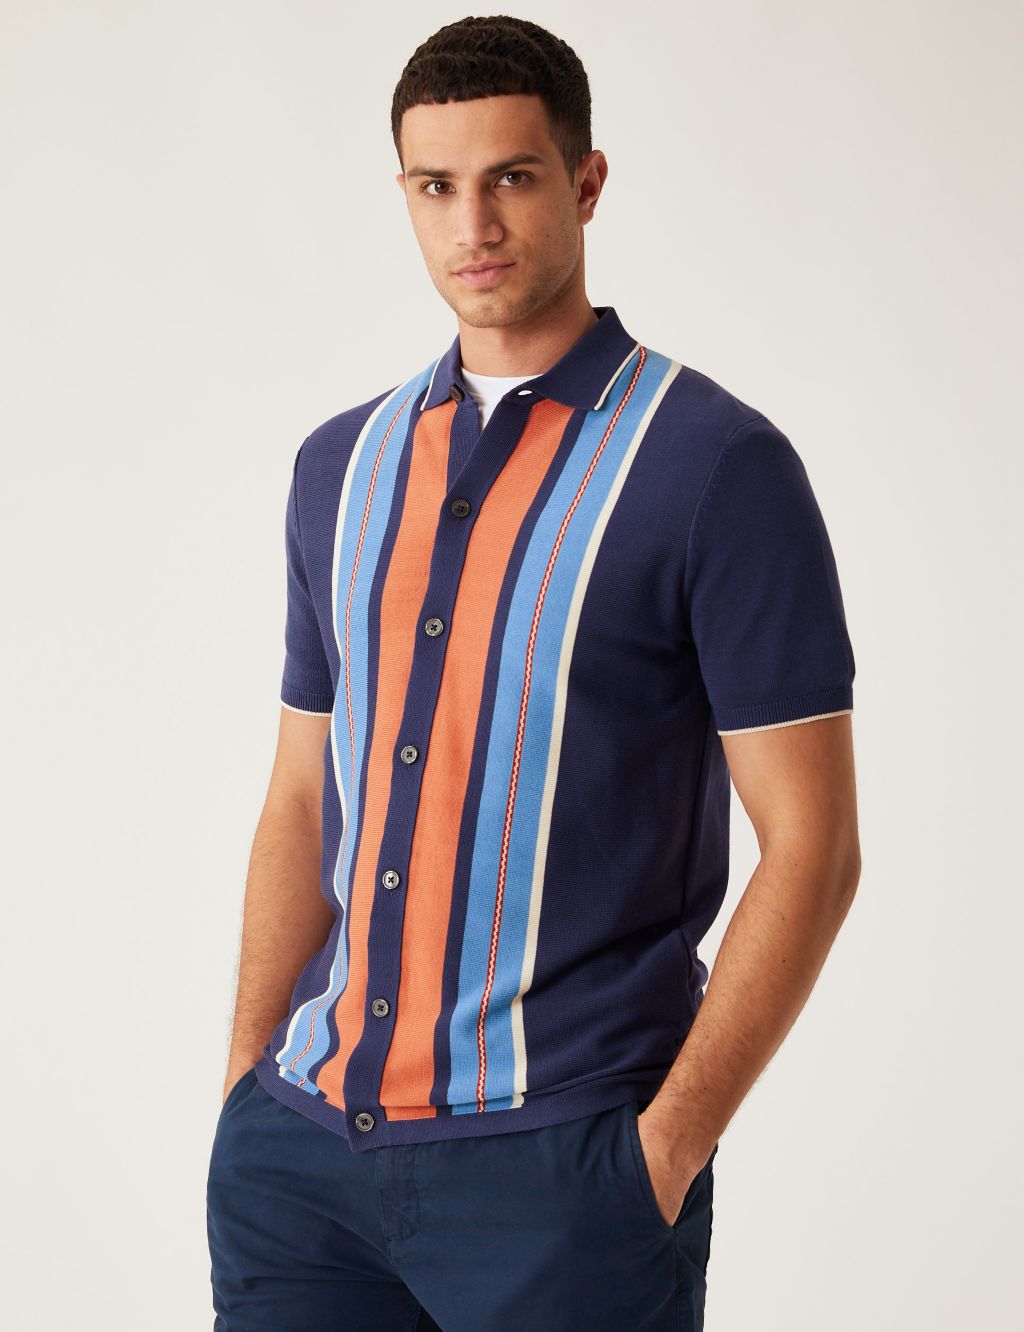 Cotton Modal Striped Knitted Polo Shirt image 1